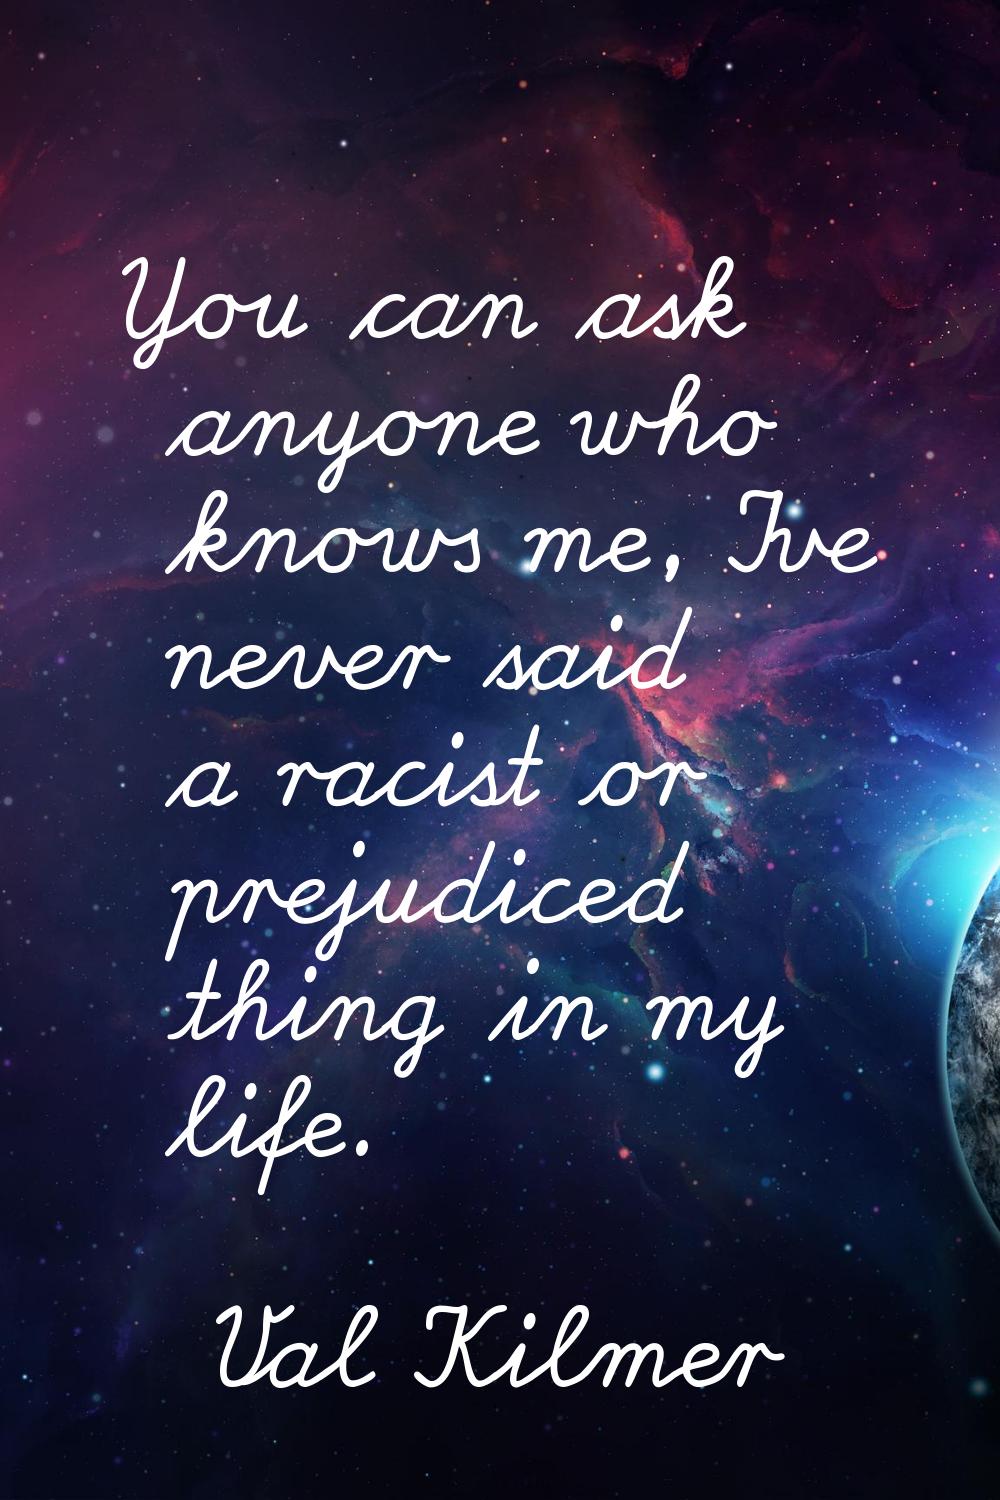 You can ask anyone who knows me, I've never said a racist or prejudiced thing in my life.